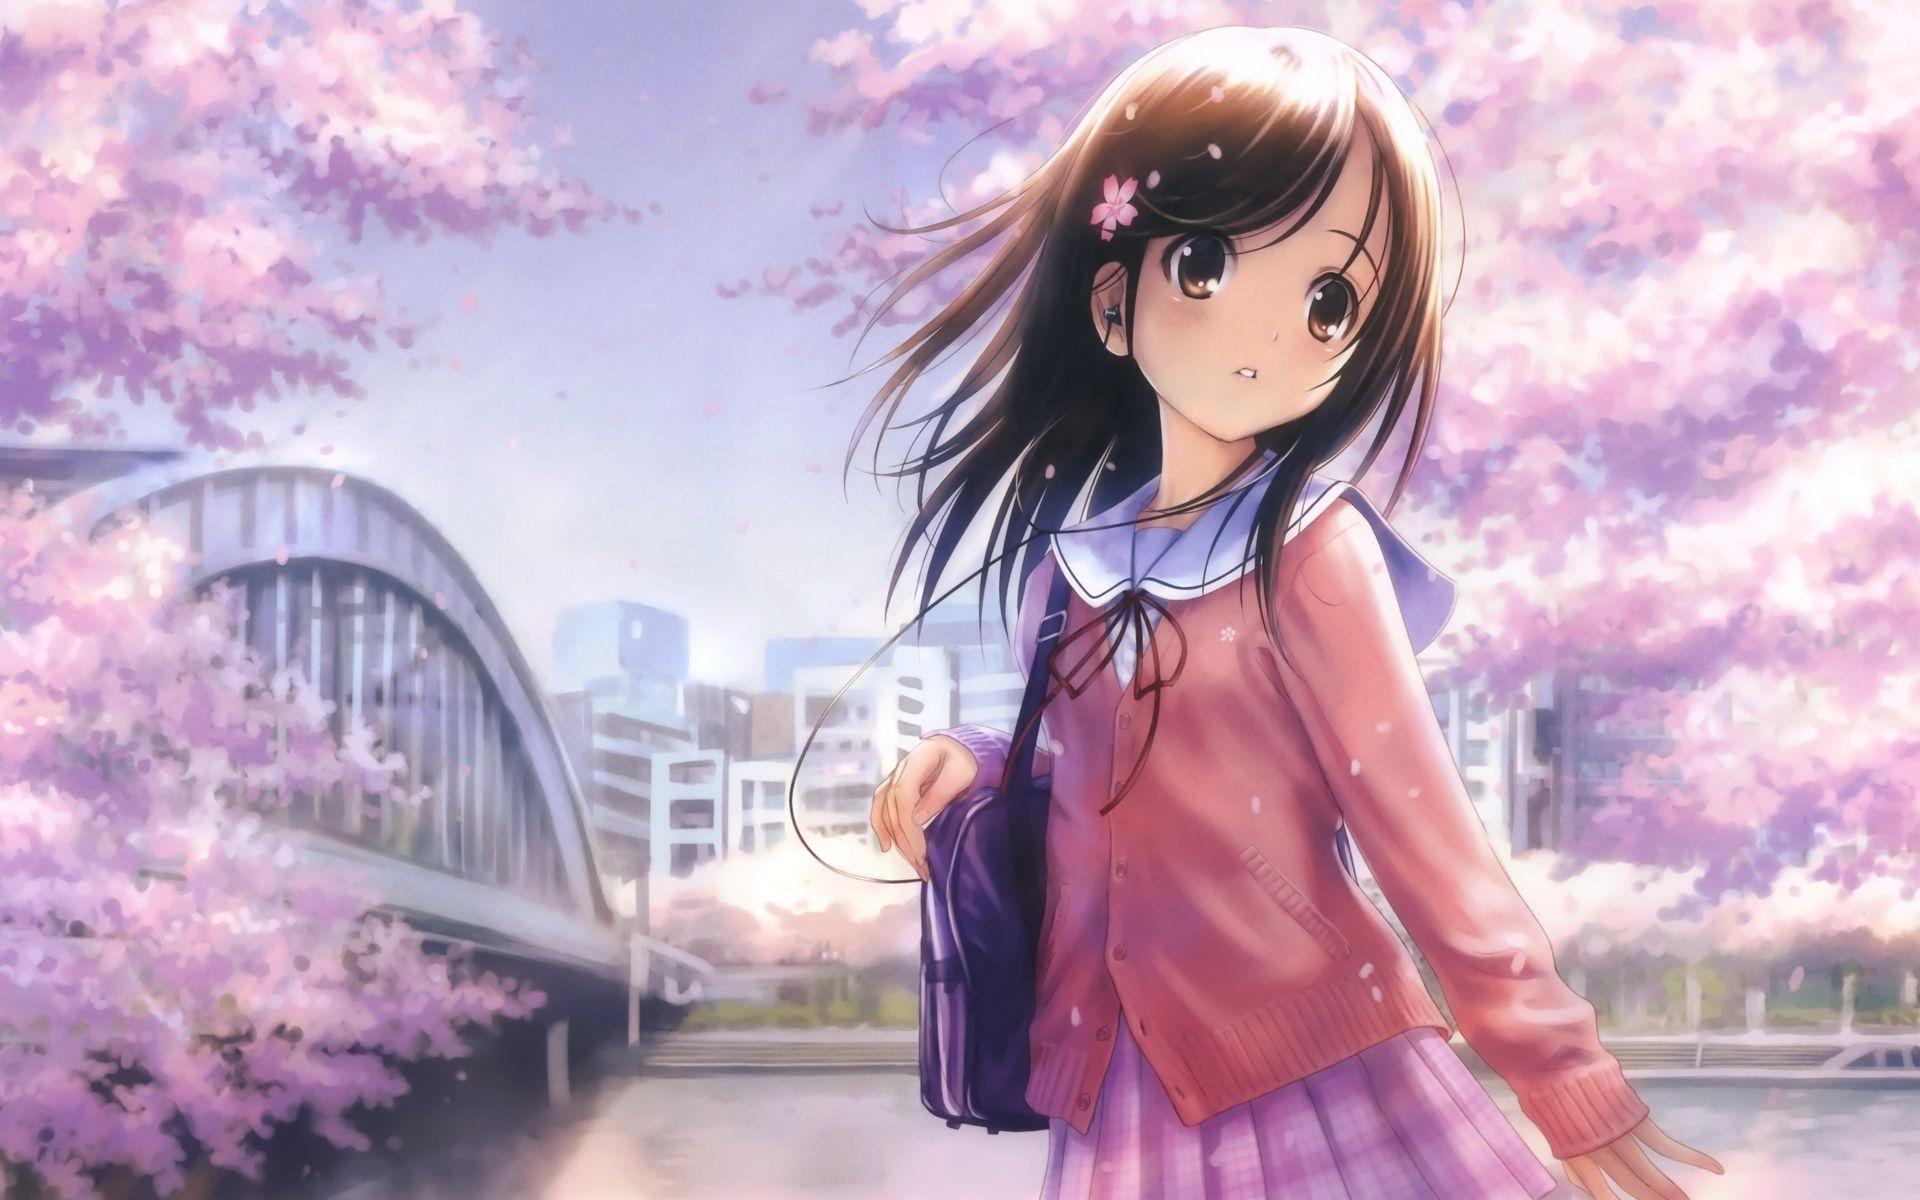 Cute Anime Girls Wallpaper {New*} Picture, Image & Photo 2021